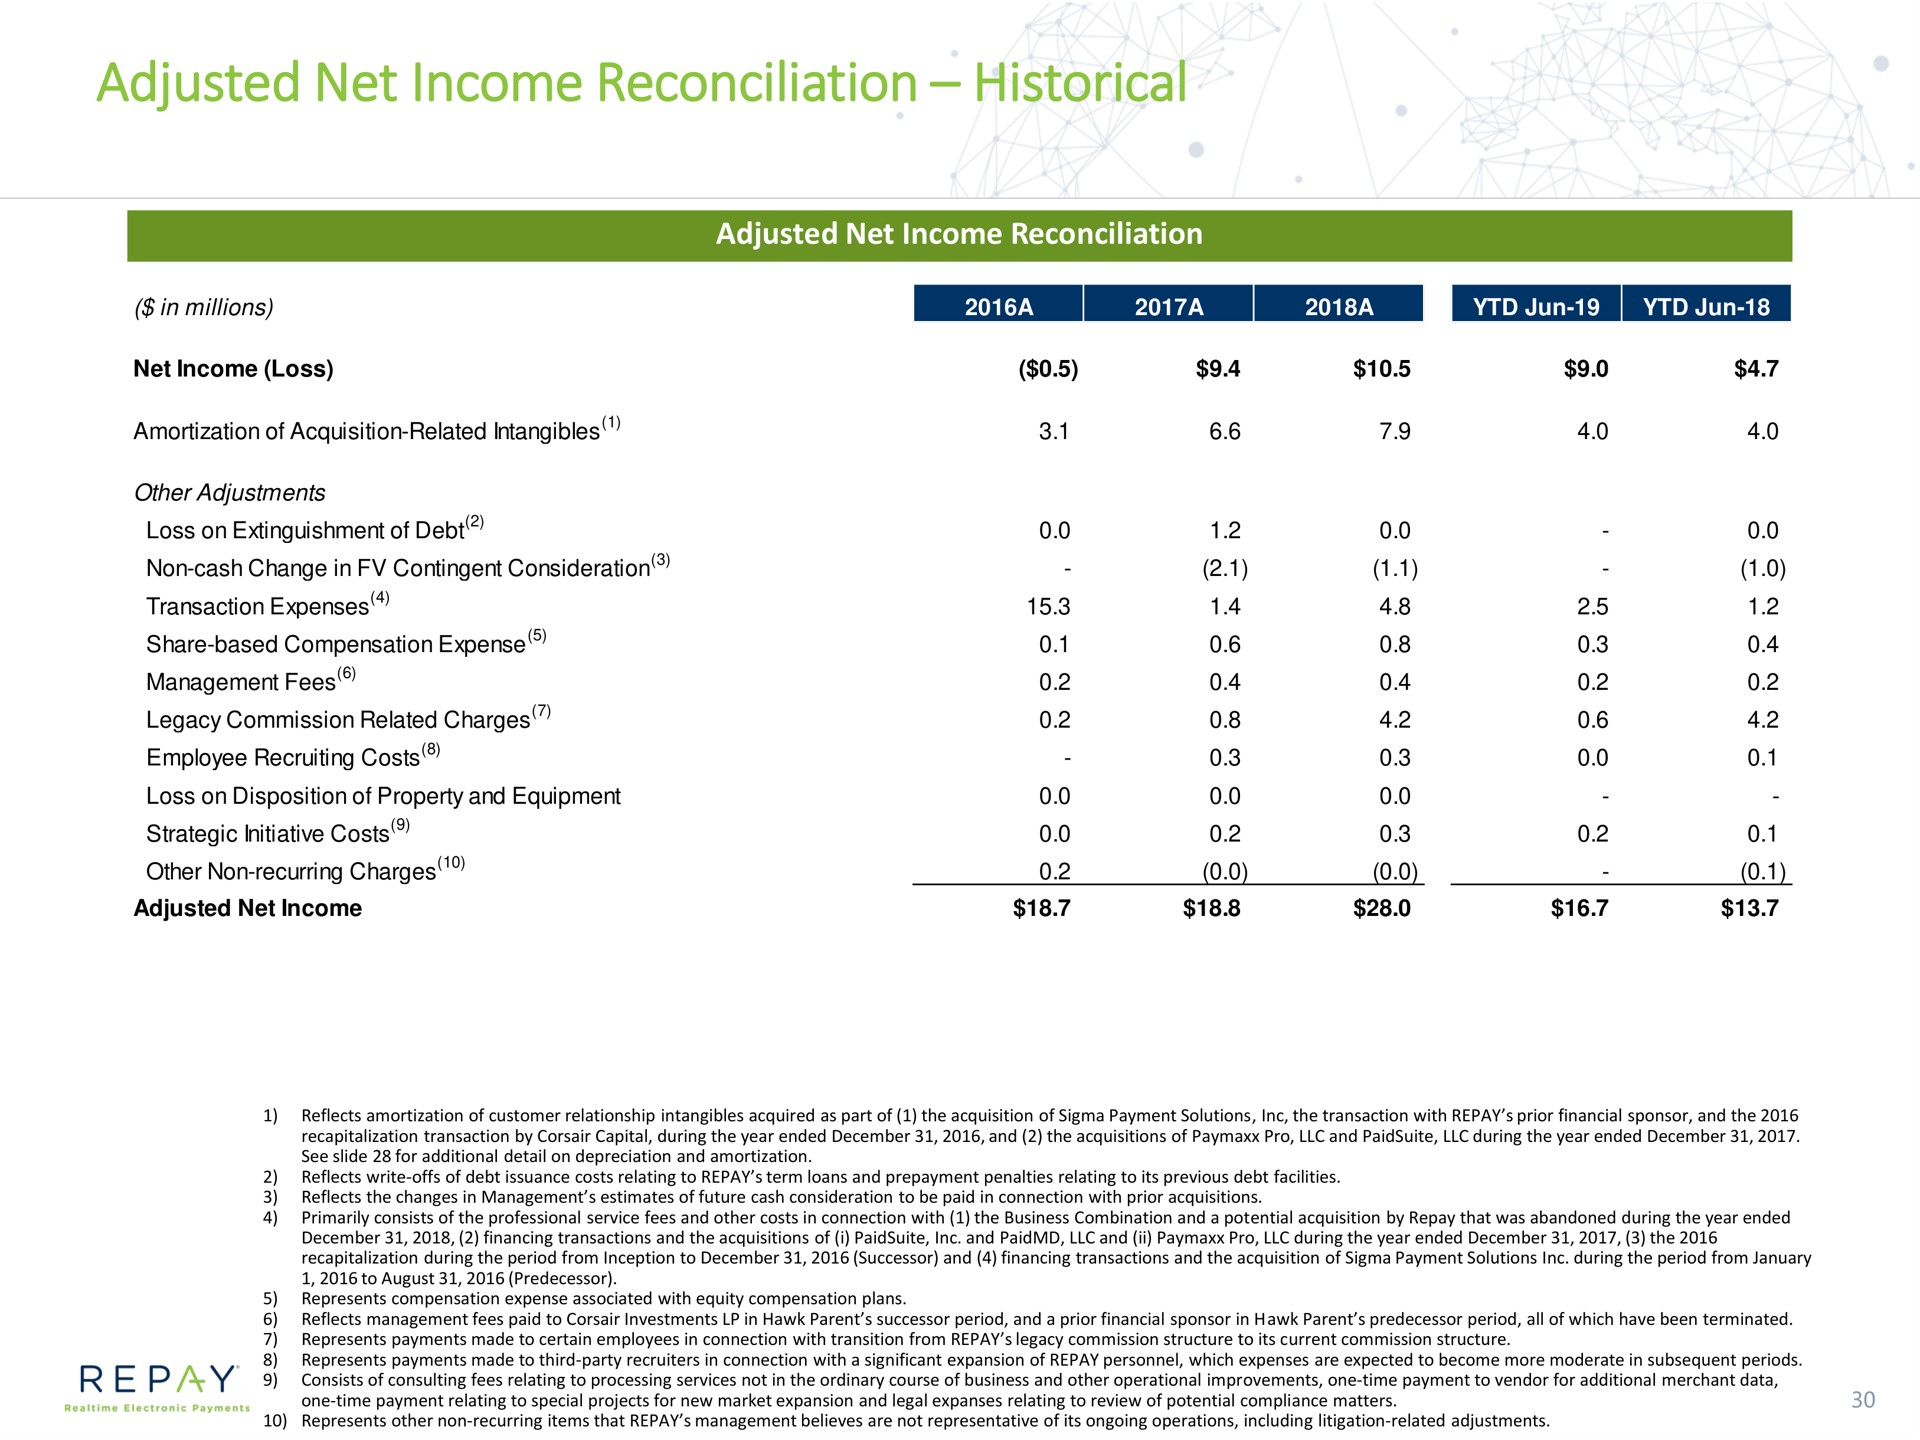 adjusted net income reconciliation historical | Repay